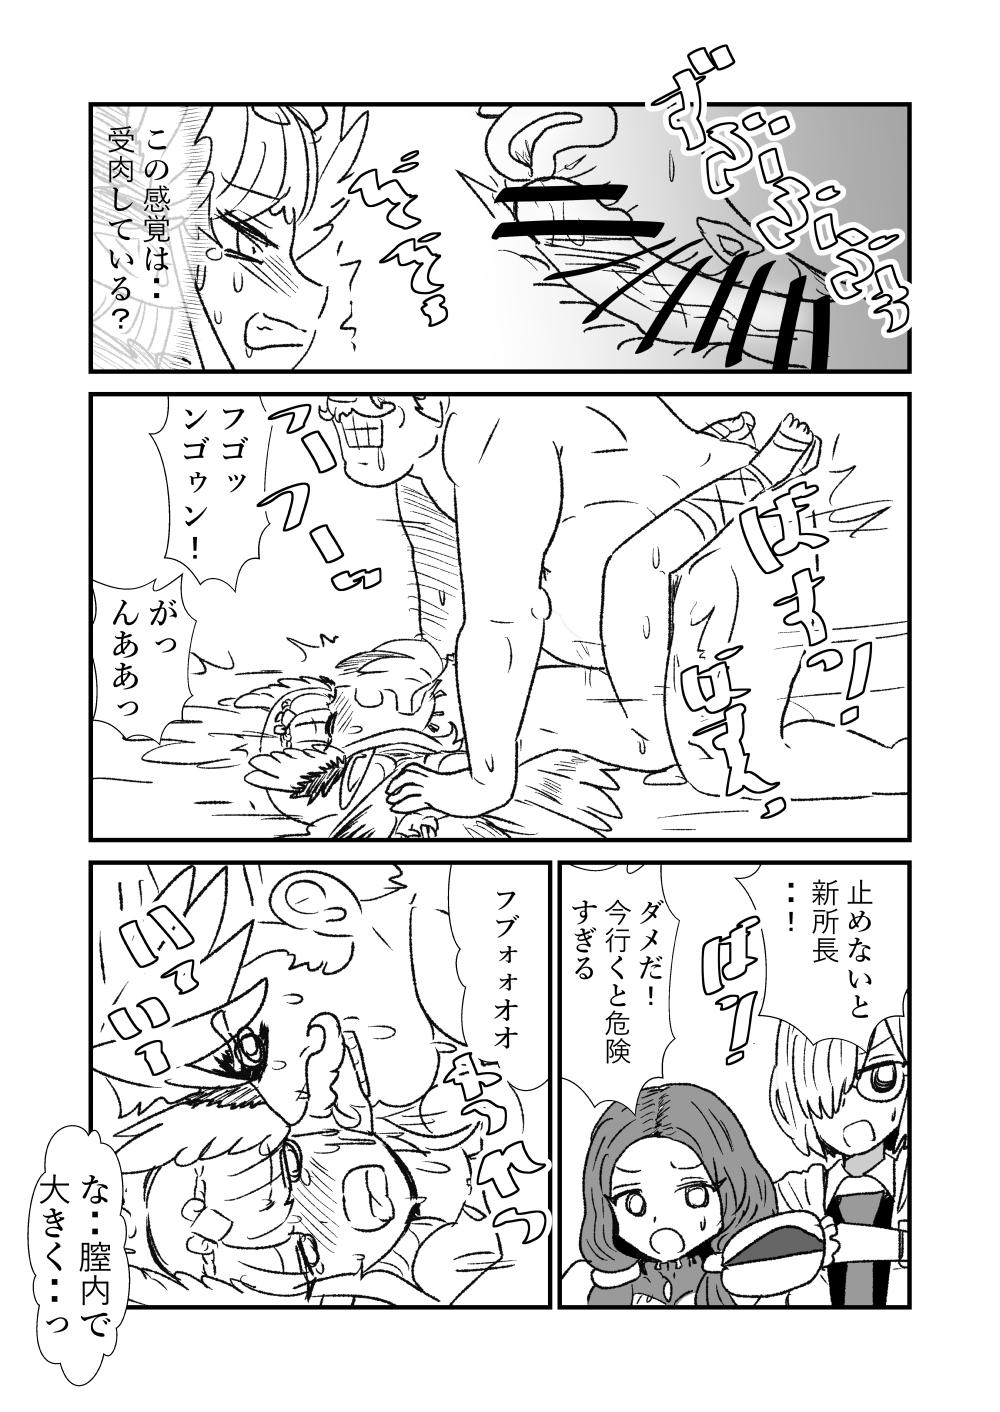 Flash FPO~桃色林檎の種付け周回～ - Fate grand order Puto - Page 6